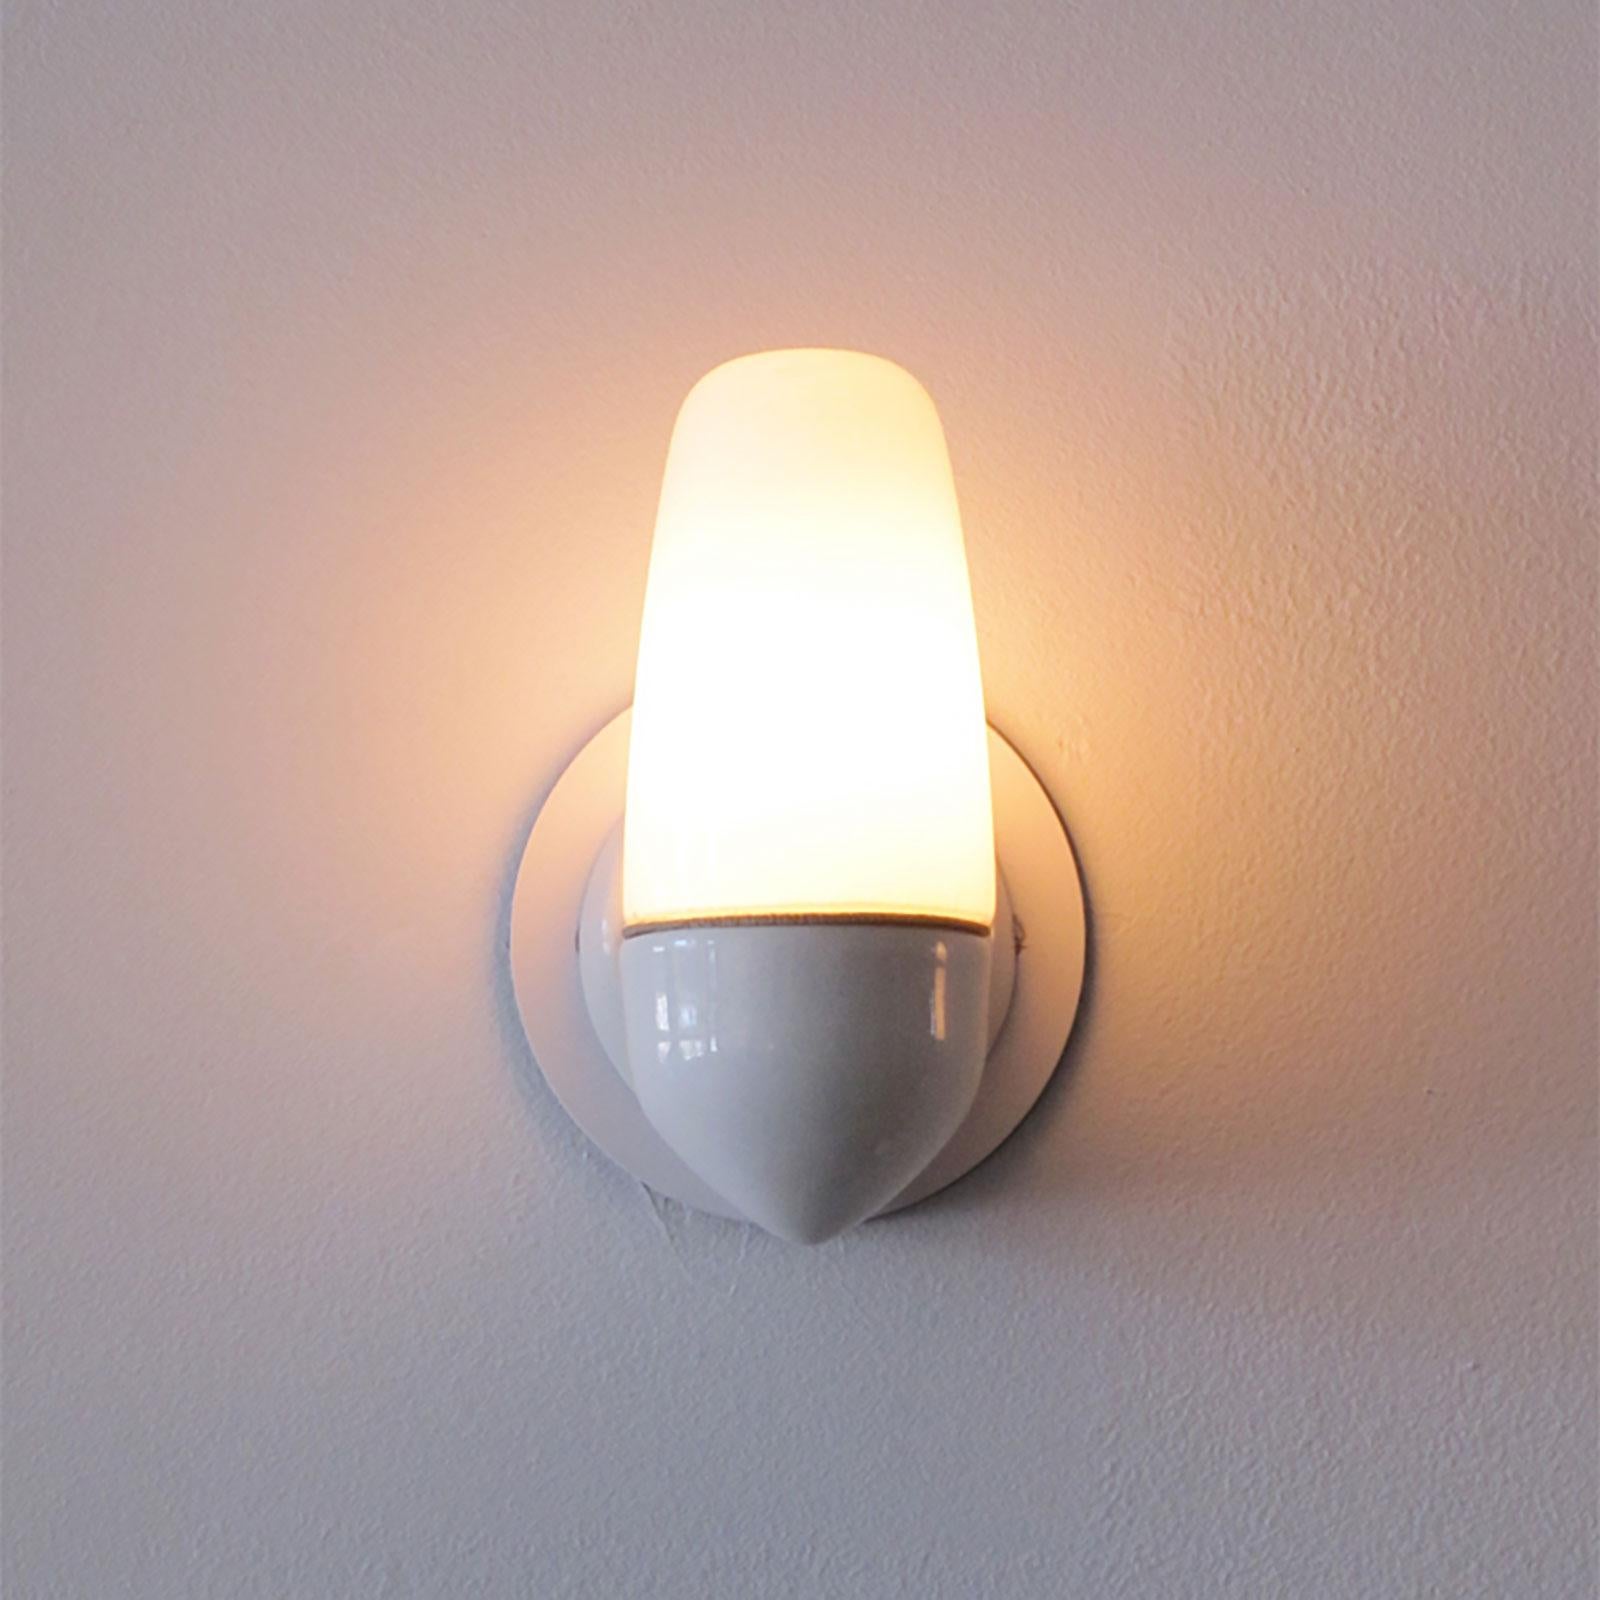 Wilhelm Wagenfeld Wall Lights for Lindner, 1950 For Sale 1